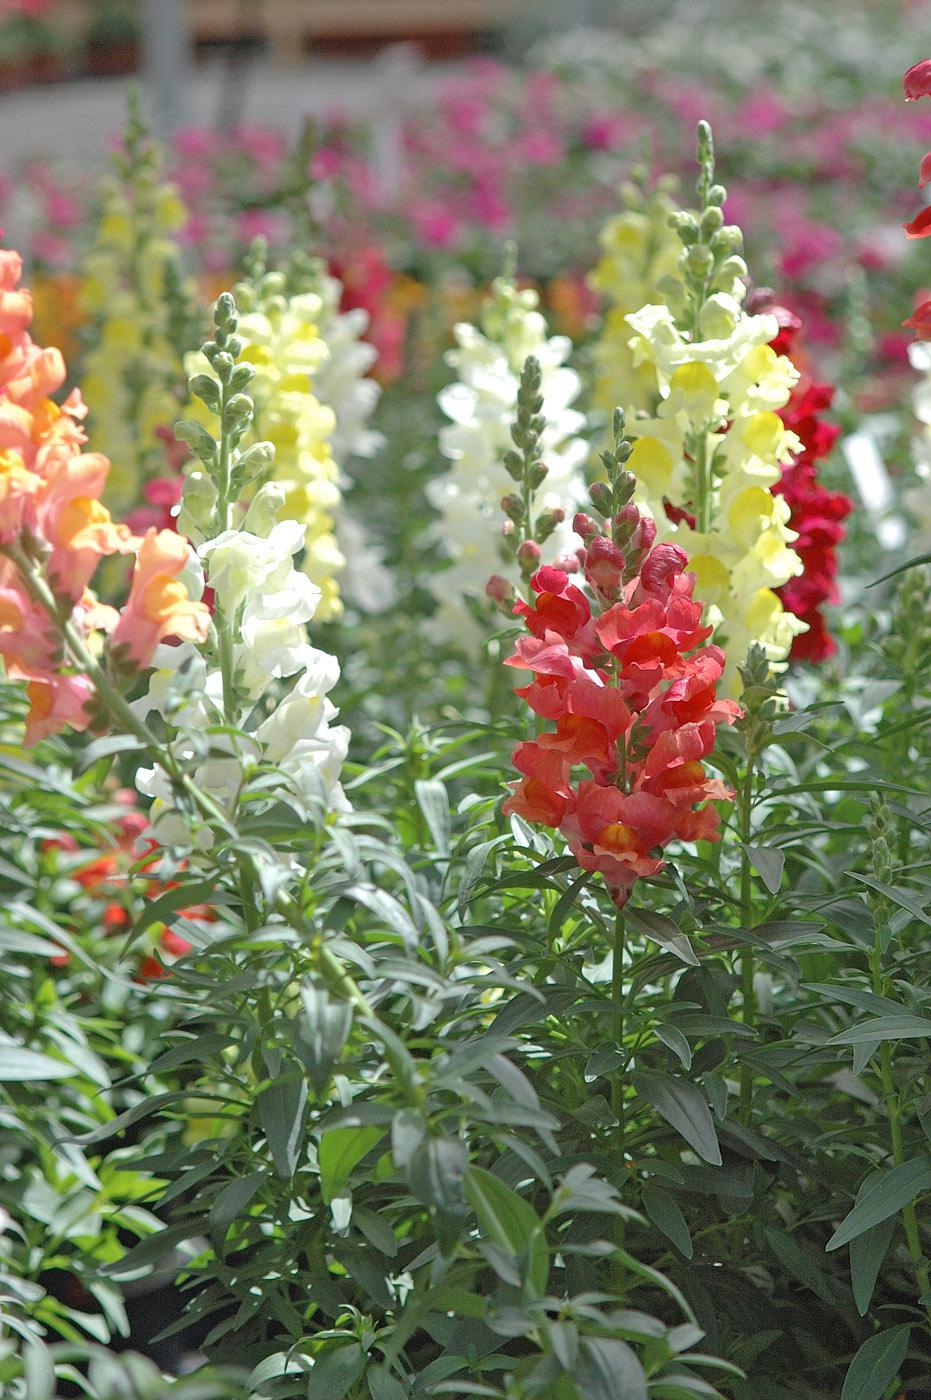 Snapdragons steal the show in landscapes. Improved breeding has made these flowers surprisingly tough. In zones 7 and warmer, gardeners plant them in the fall as pansy partners. They are planted in late winter to early spring in colder areas for riotous colors almost all summer. (Photo by Norman Winter)